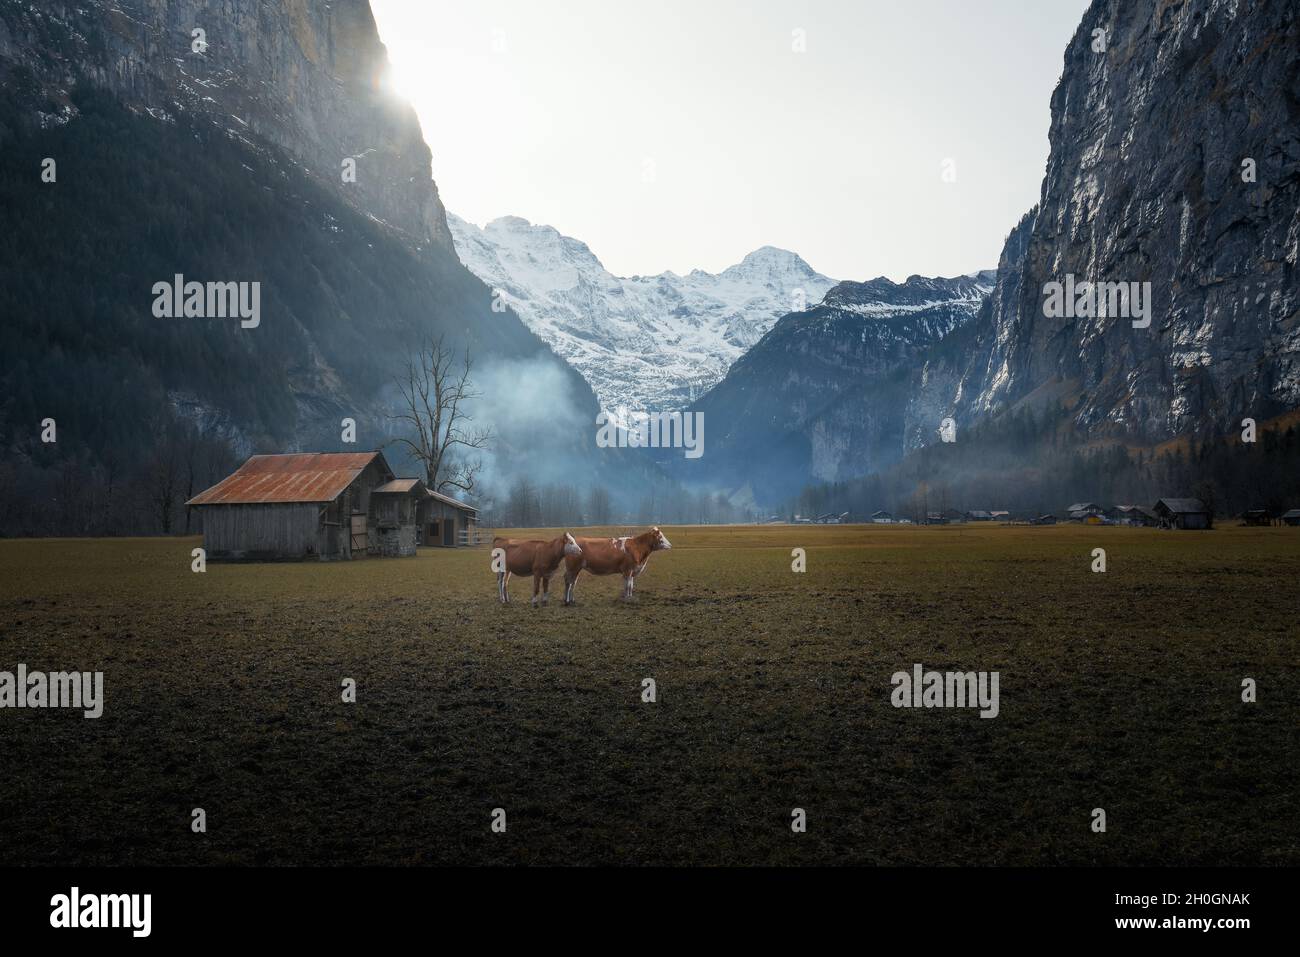 Two cows in a valley in the middle of Alps Mountains - Lauterbrunnen, Switzerland Stock Photo